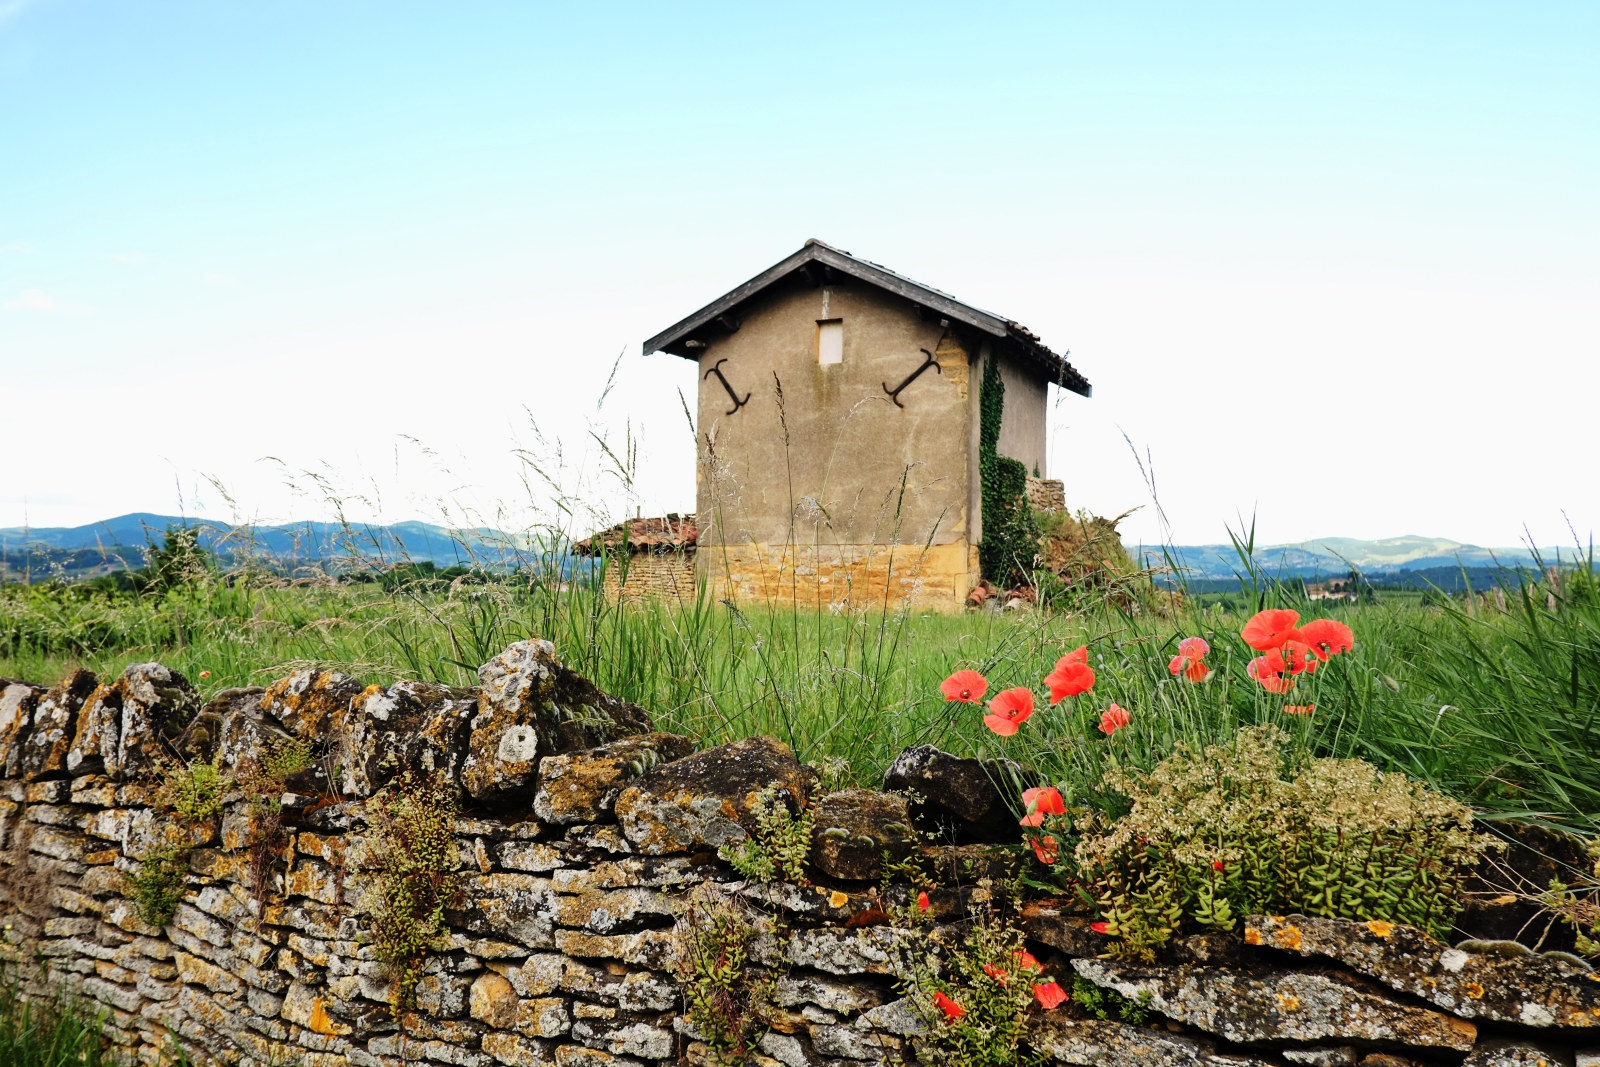 Beaujolais countryside; local dry stonework covered in lichen, roadside poppies, an old farm building and views to the hills. Photography by Kent Johnson.